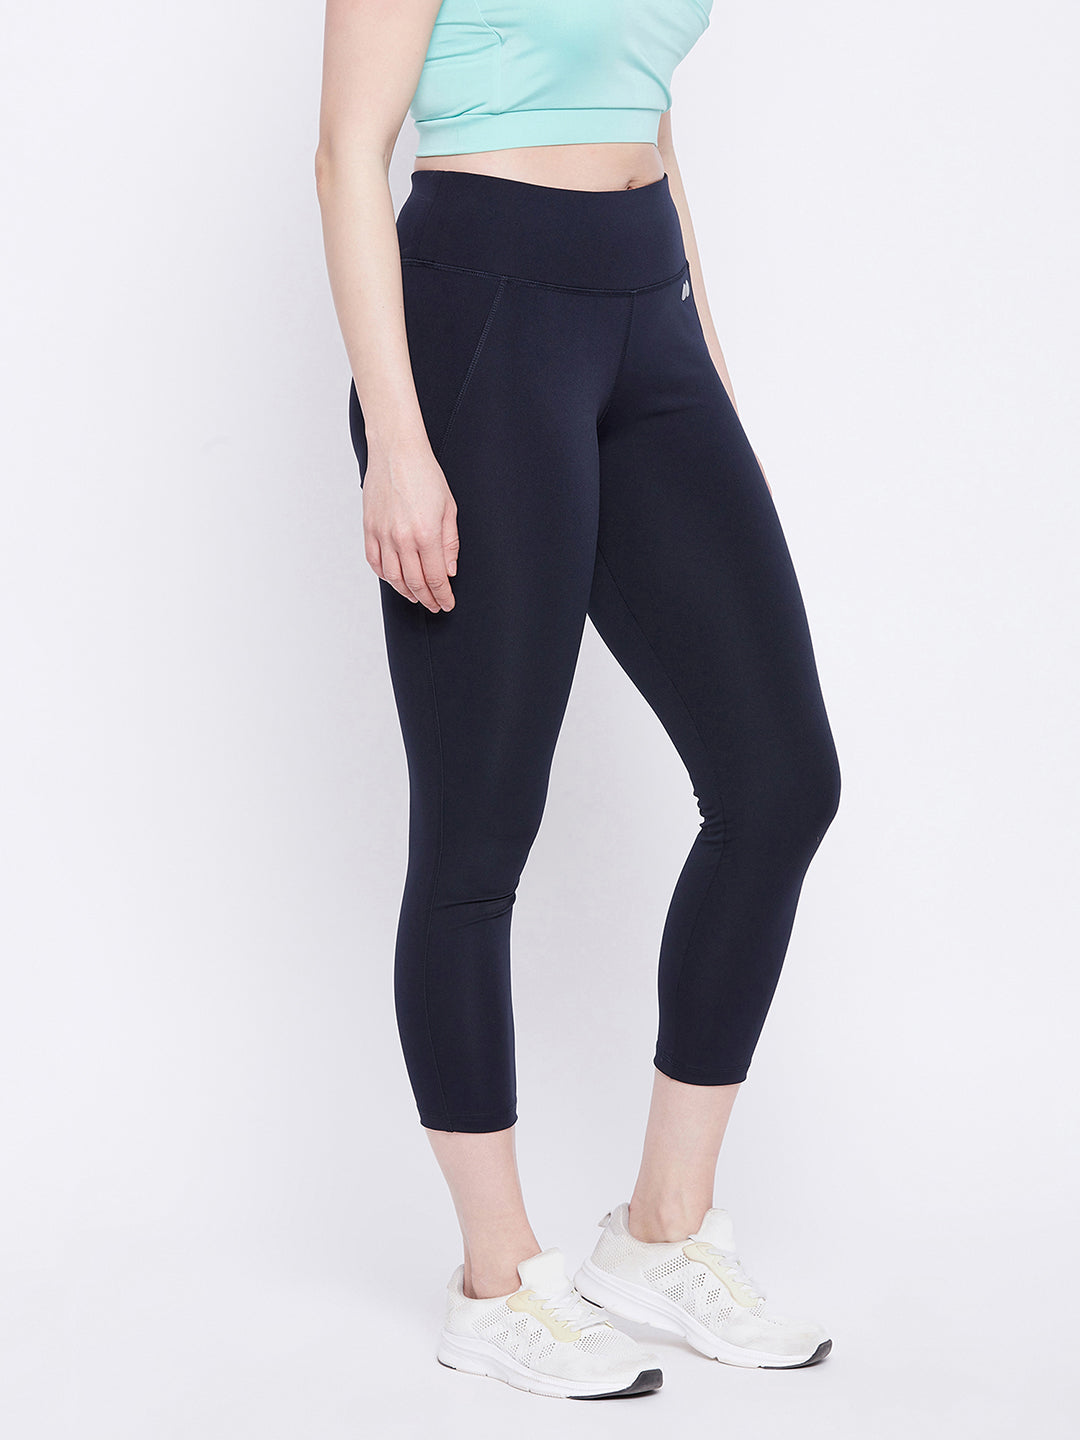 Snug Fit Active Tights In Navy